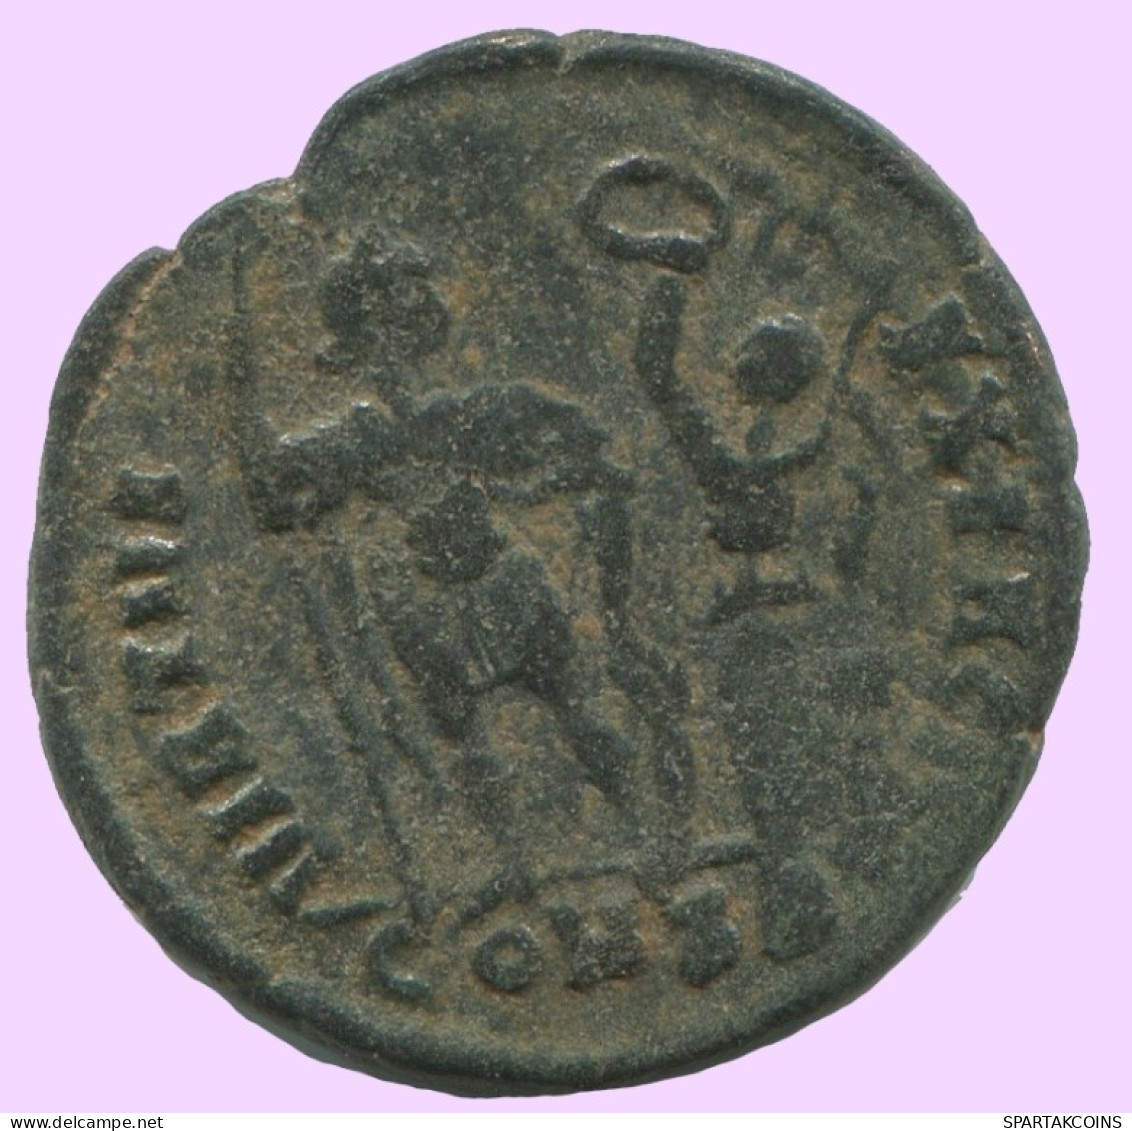 LATE ROMAN EMPIRE Pièce Antique Authentique Roman Pièce 2.2g/18mm #ANT2386.14.F.A - The End Of Empire (363 AD To 476 AD)